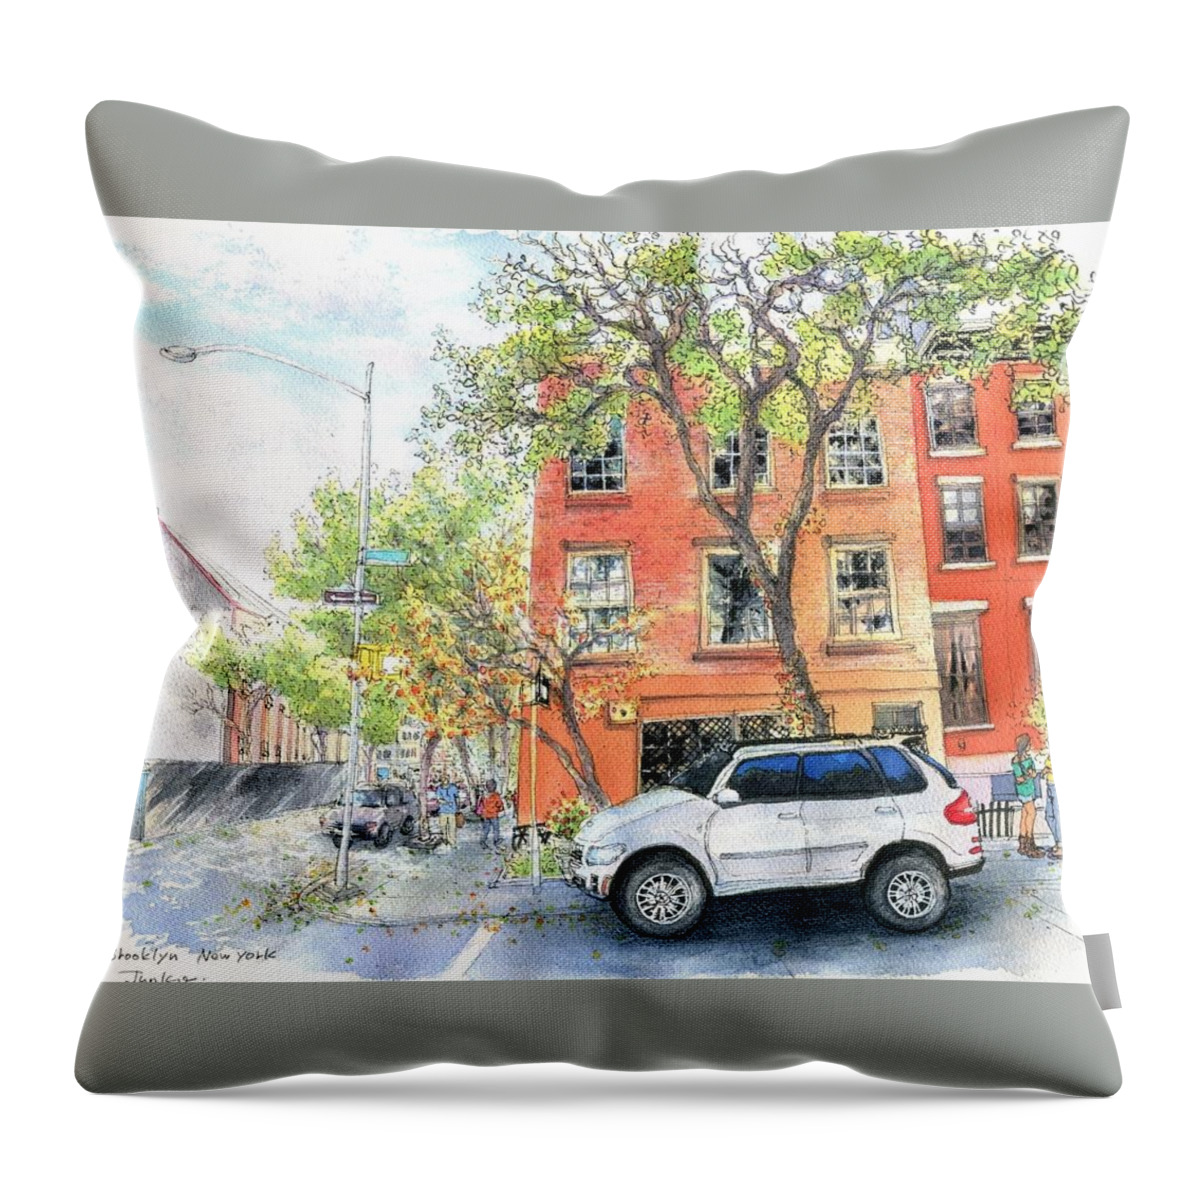  Throw Pillow featuring the photograph Brooklyn NewYork by Junko Nishimura